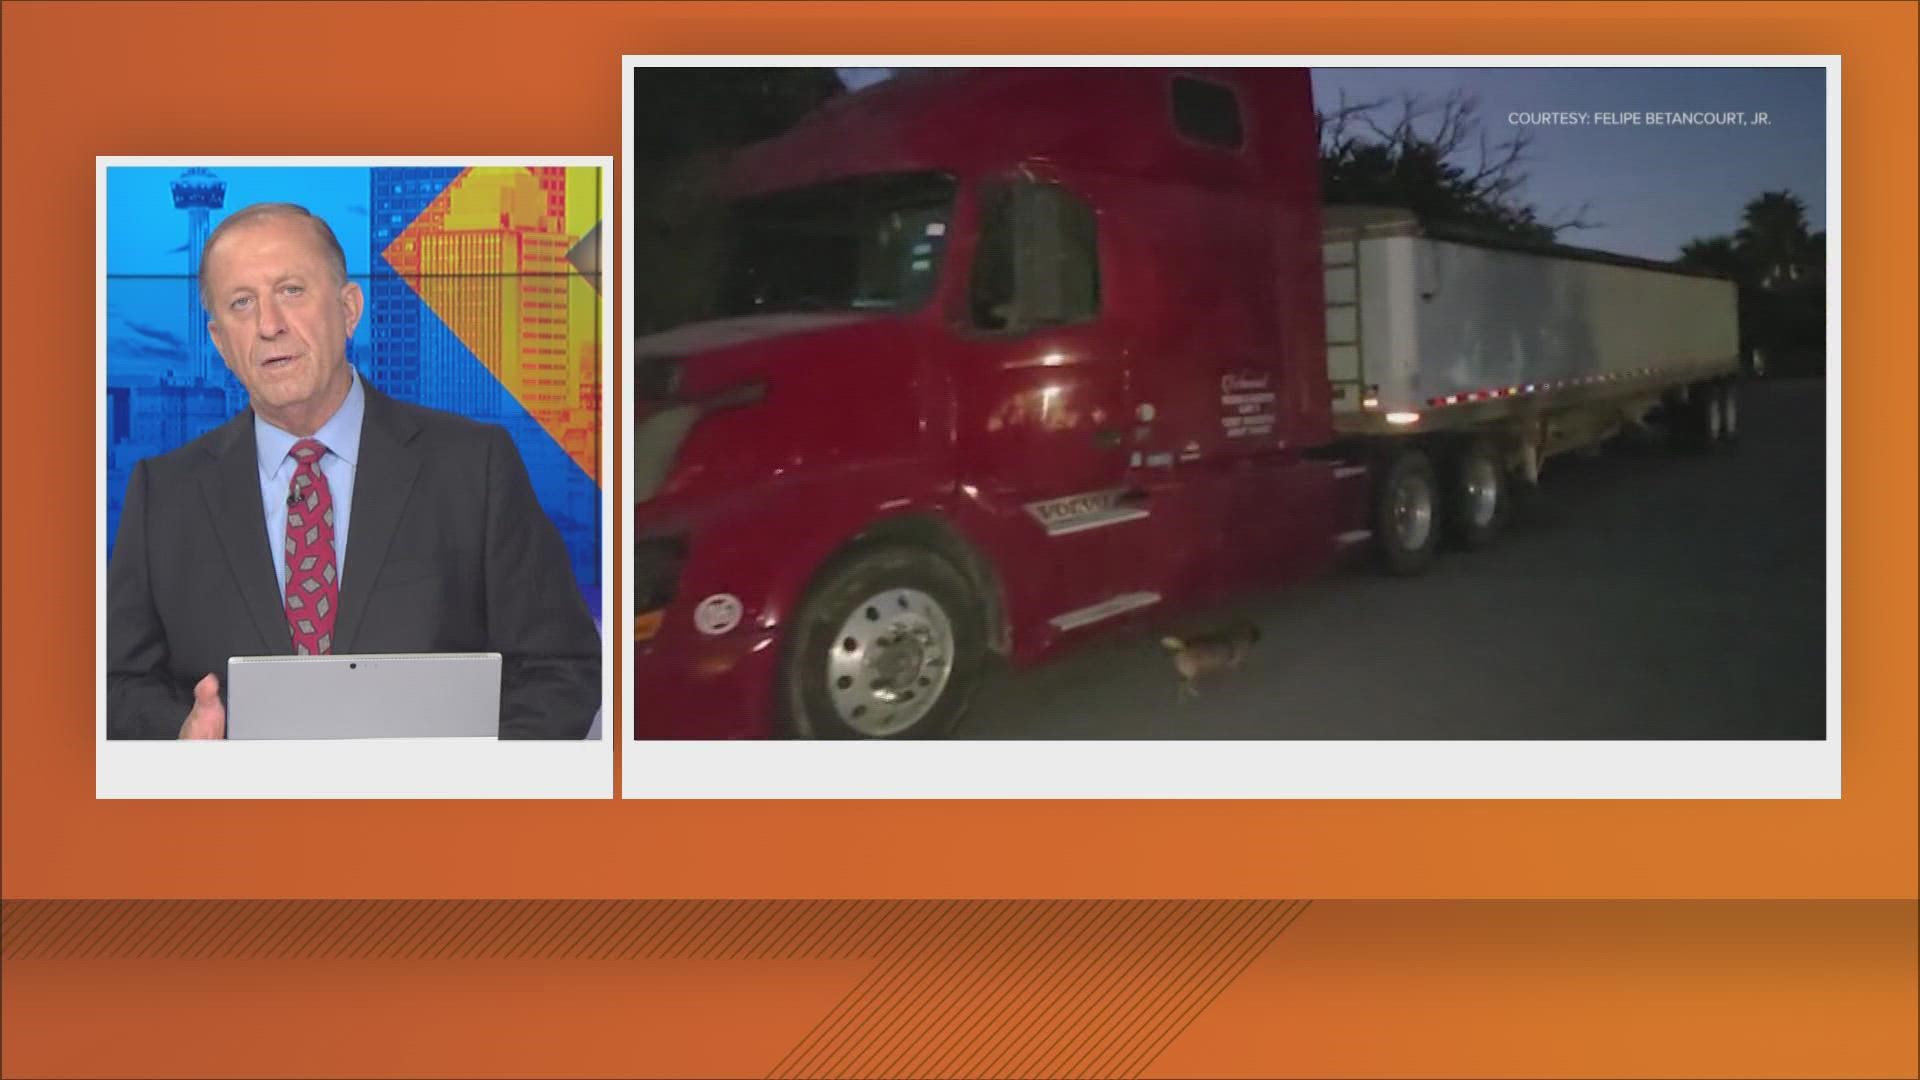 Hear from a Texas trucking company that claimed someone stole its identification numbers and put them on the truck found in San Antonio.